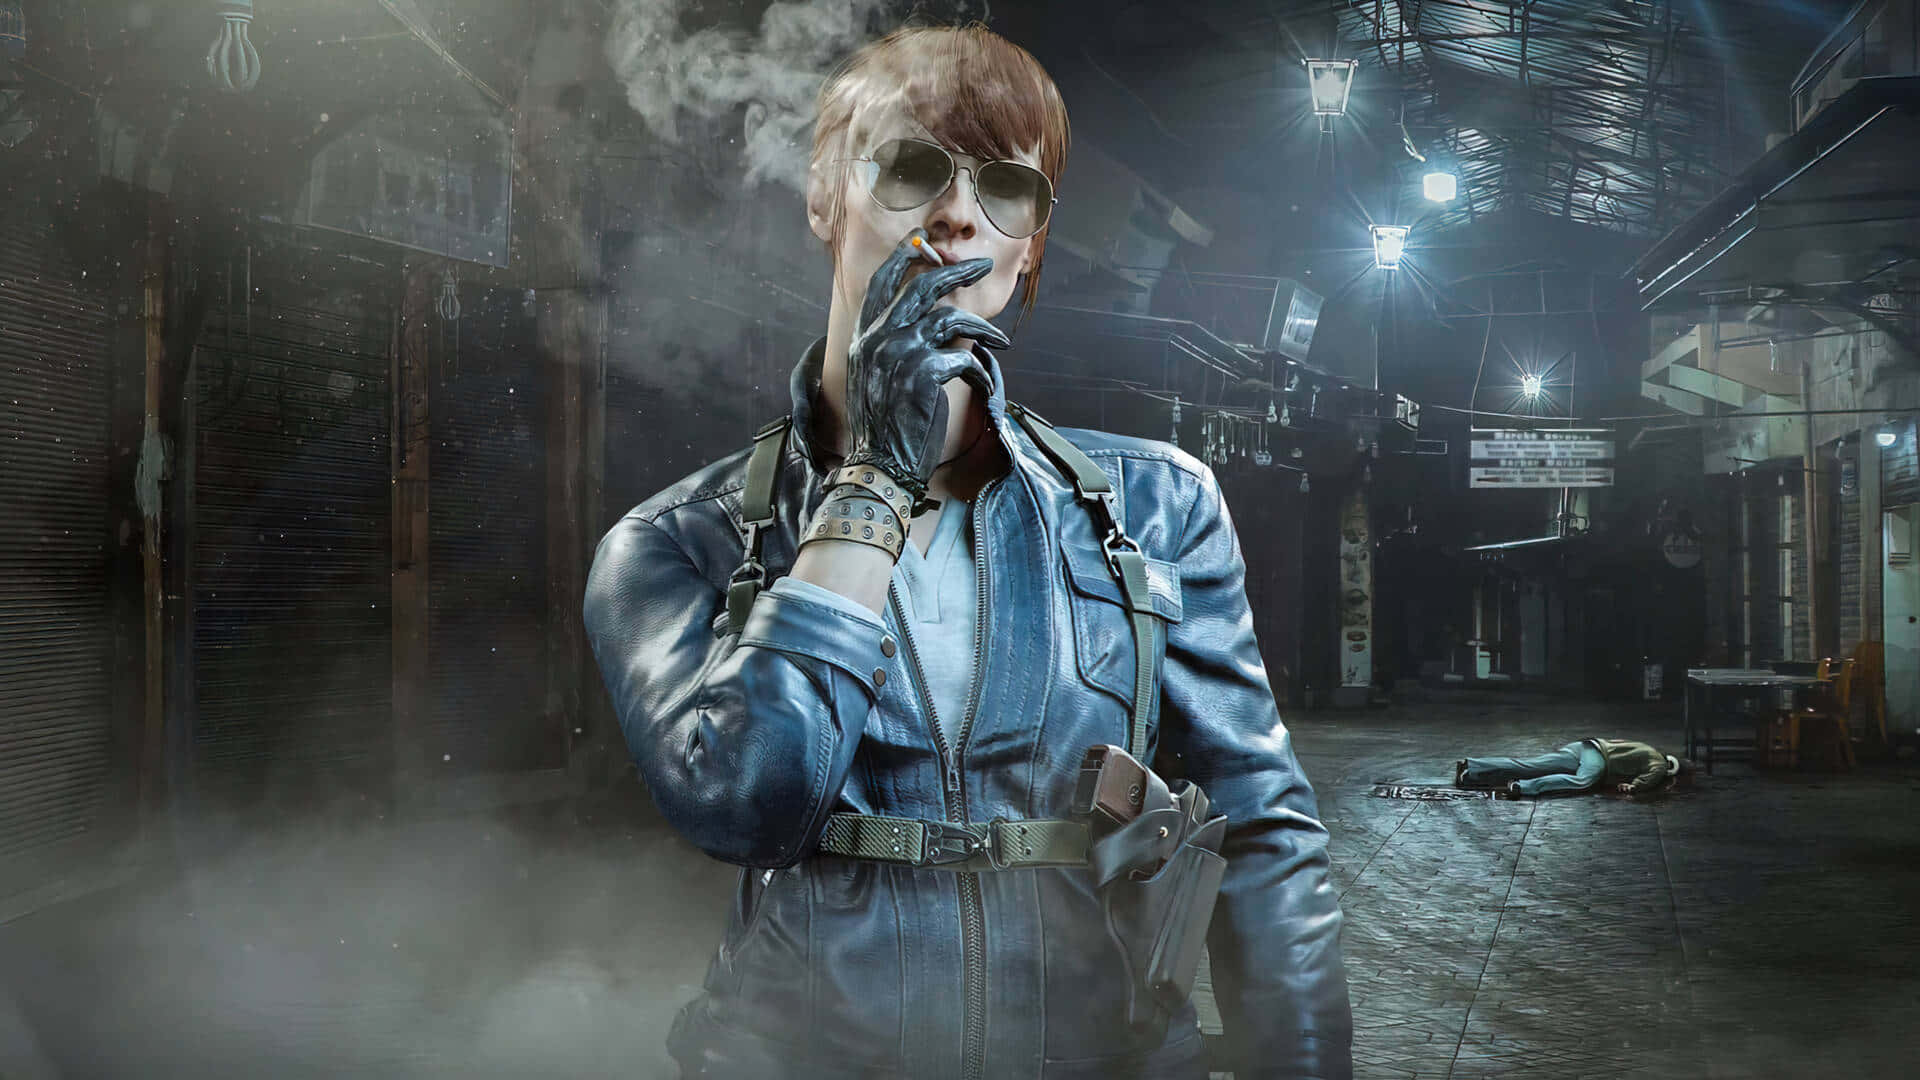 a woman in a leather jacket smoking in an alley